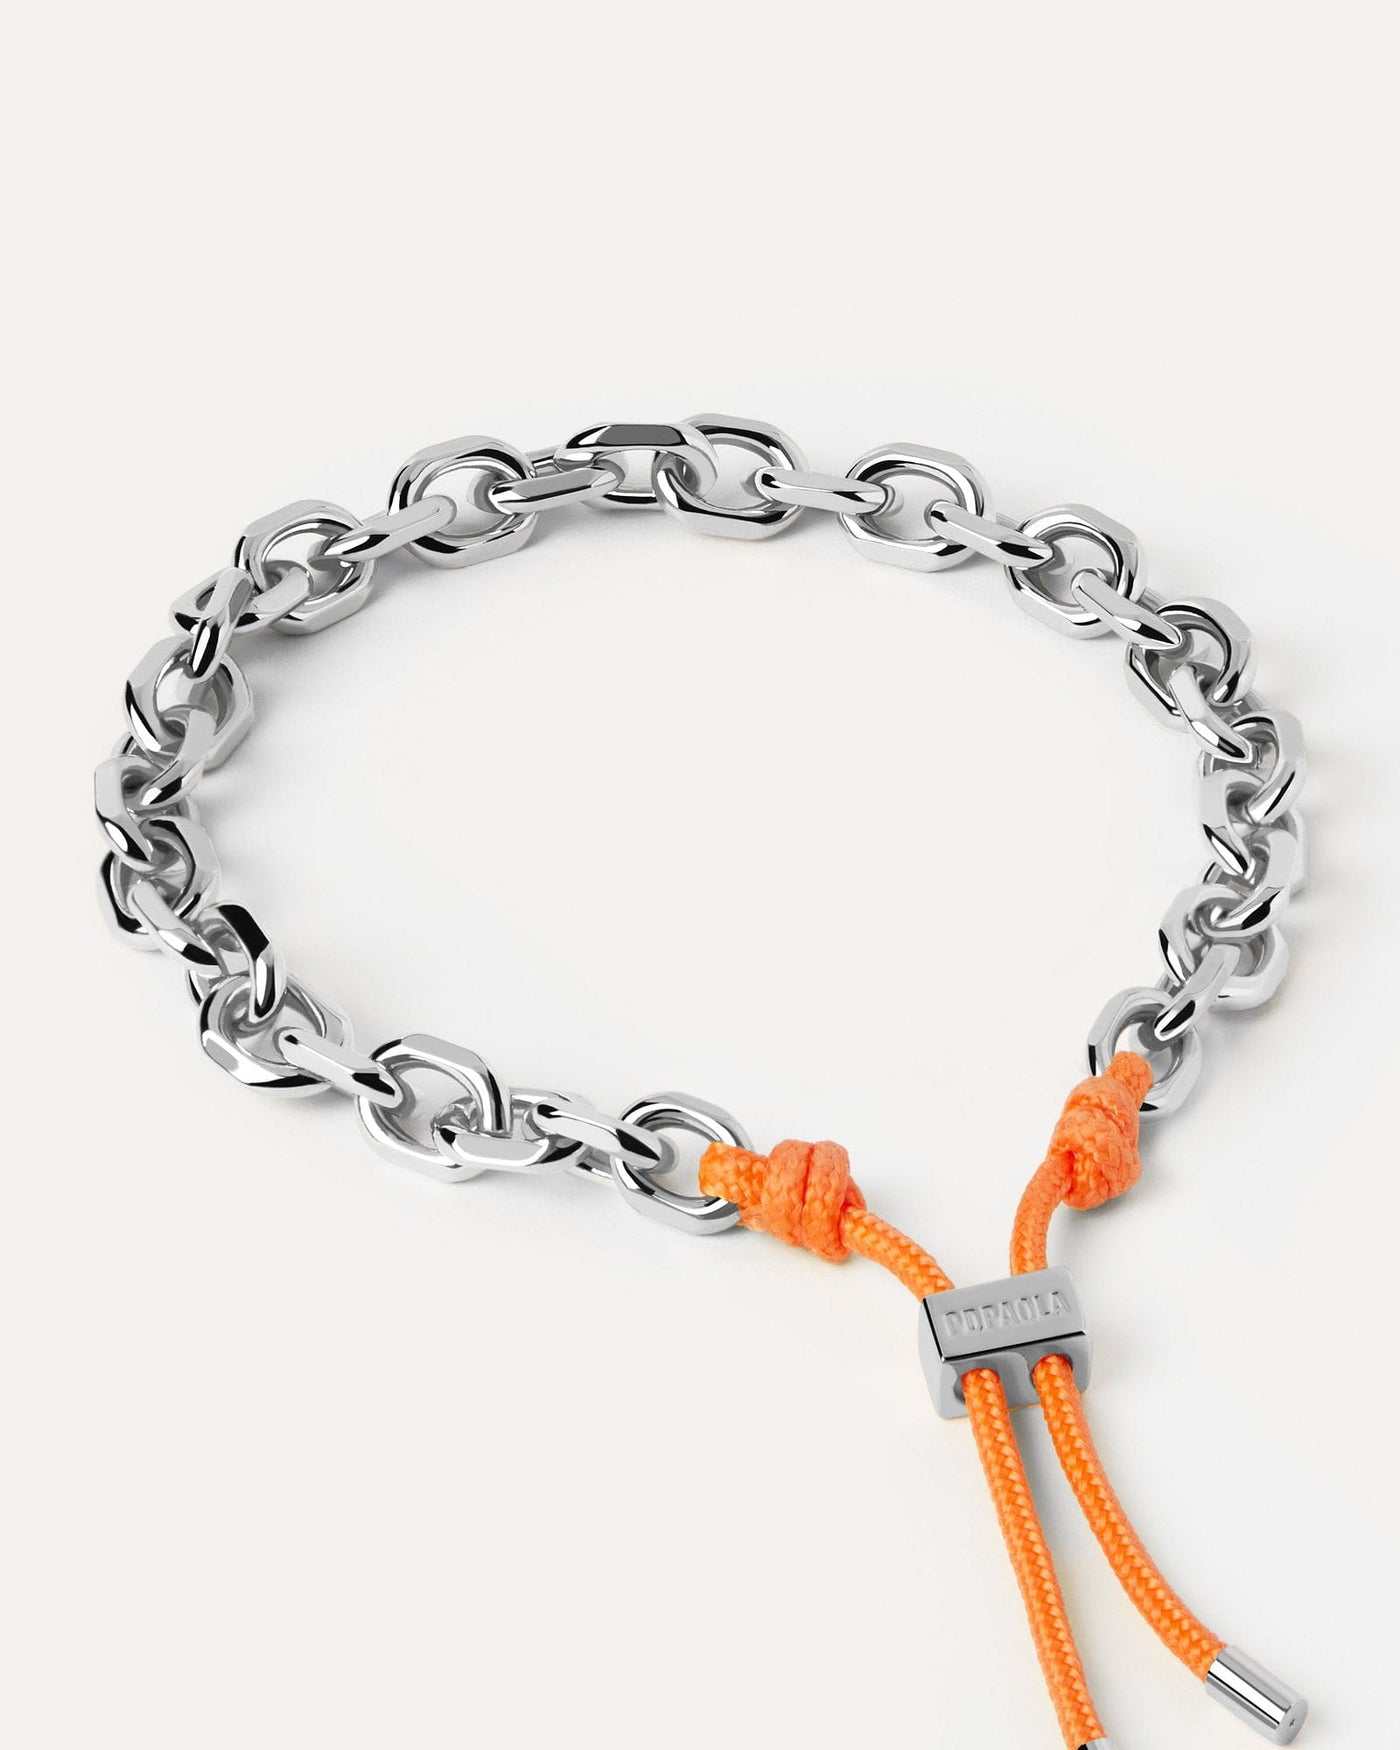 2024 Selection | Tangerine Essential Rope and Chain Silver Bracelet. Silver chain bracelet with a multicolor rope adjustable sliding clasp. Get the latest arrival from PDPAOLA. Place your order safely and get this Best Seller. Free Shipping.